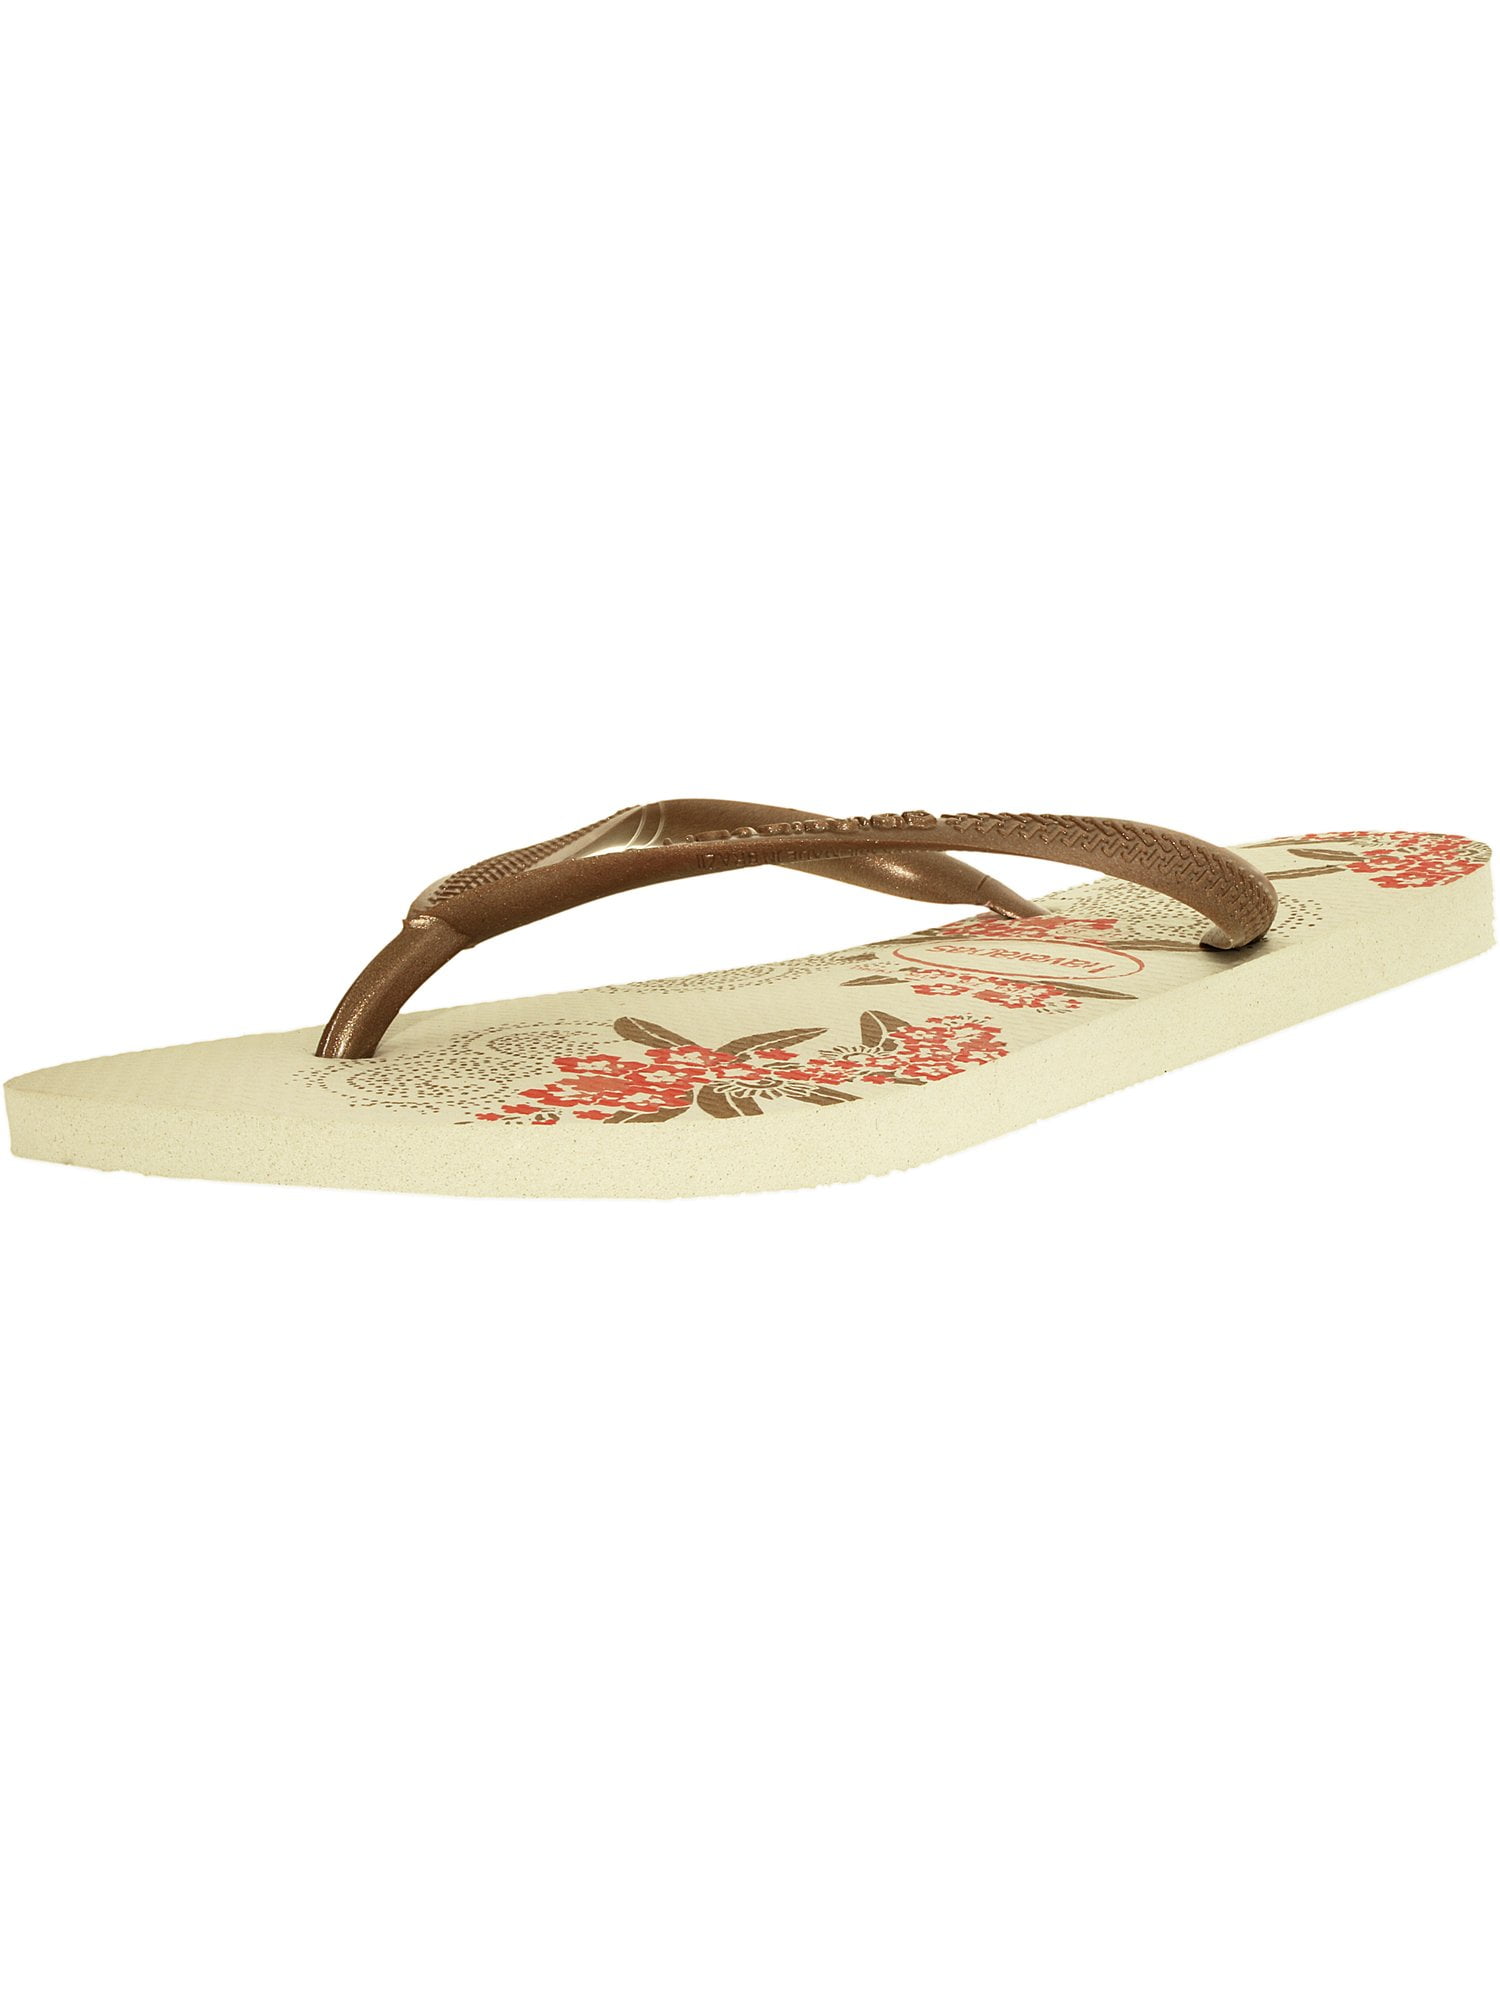 havaianas sandals white and gold